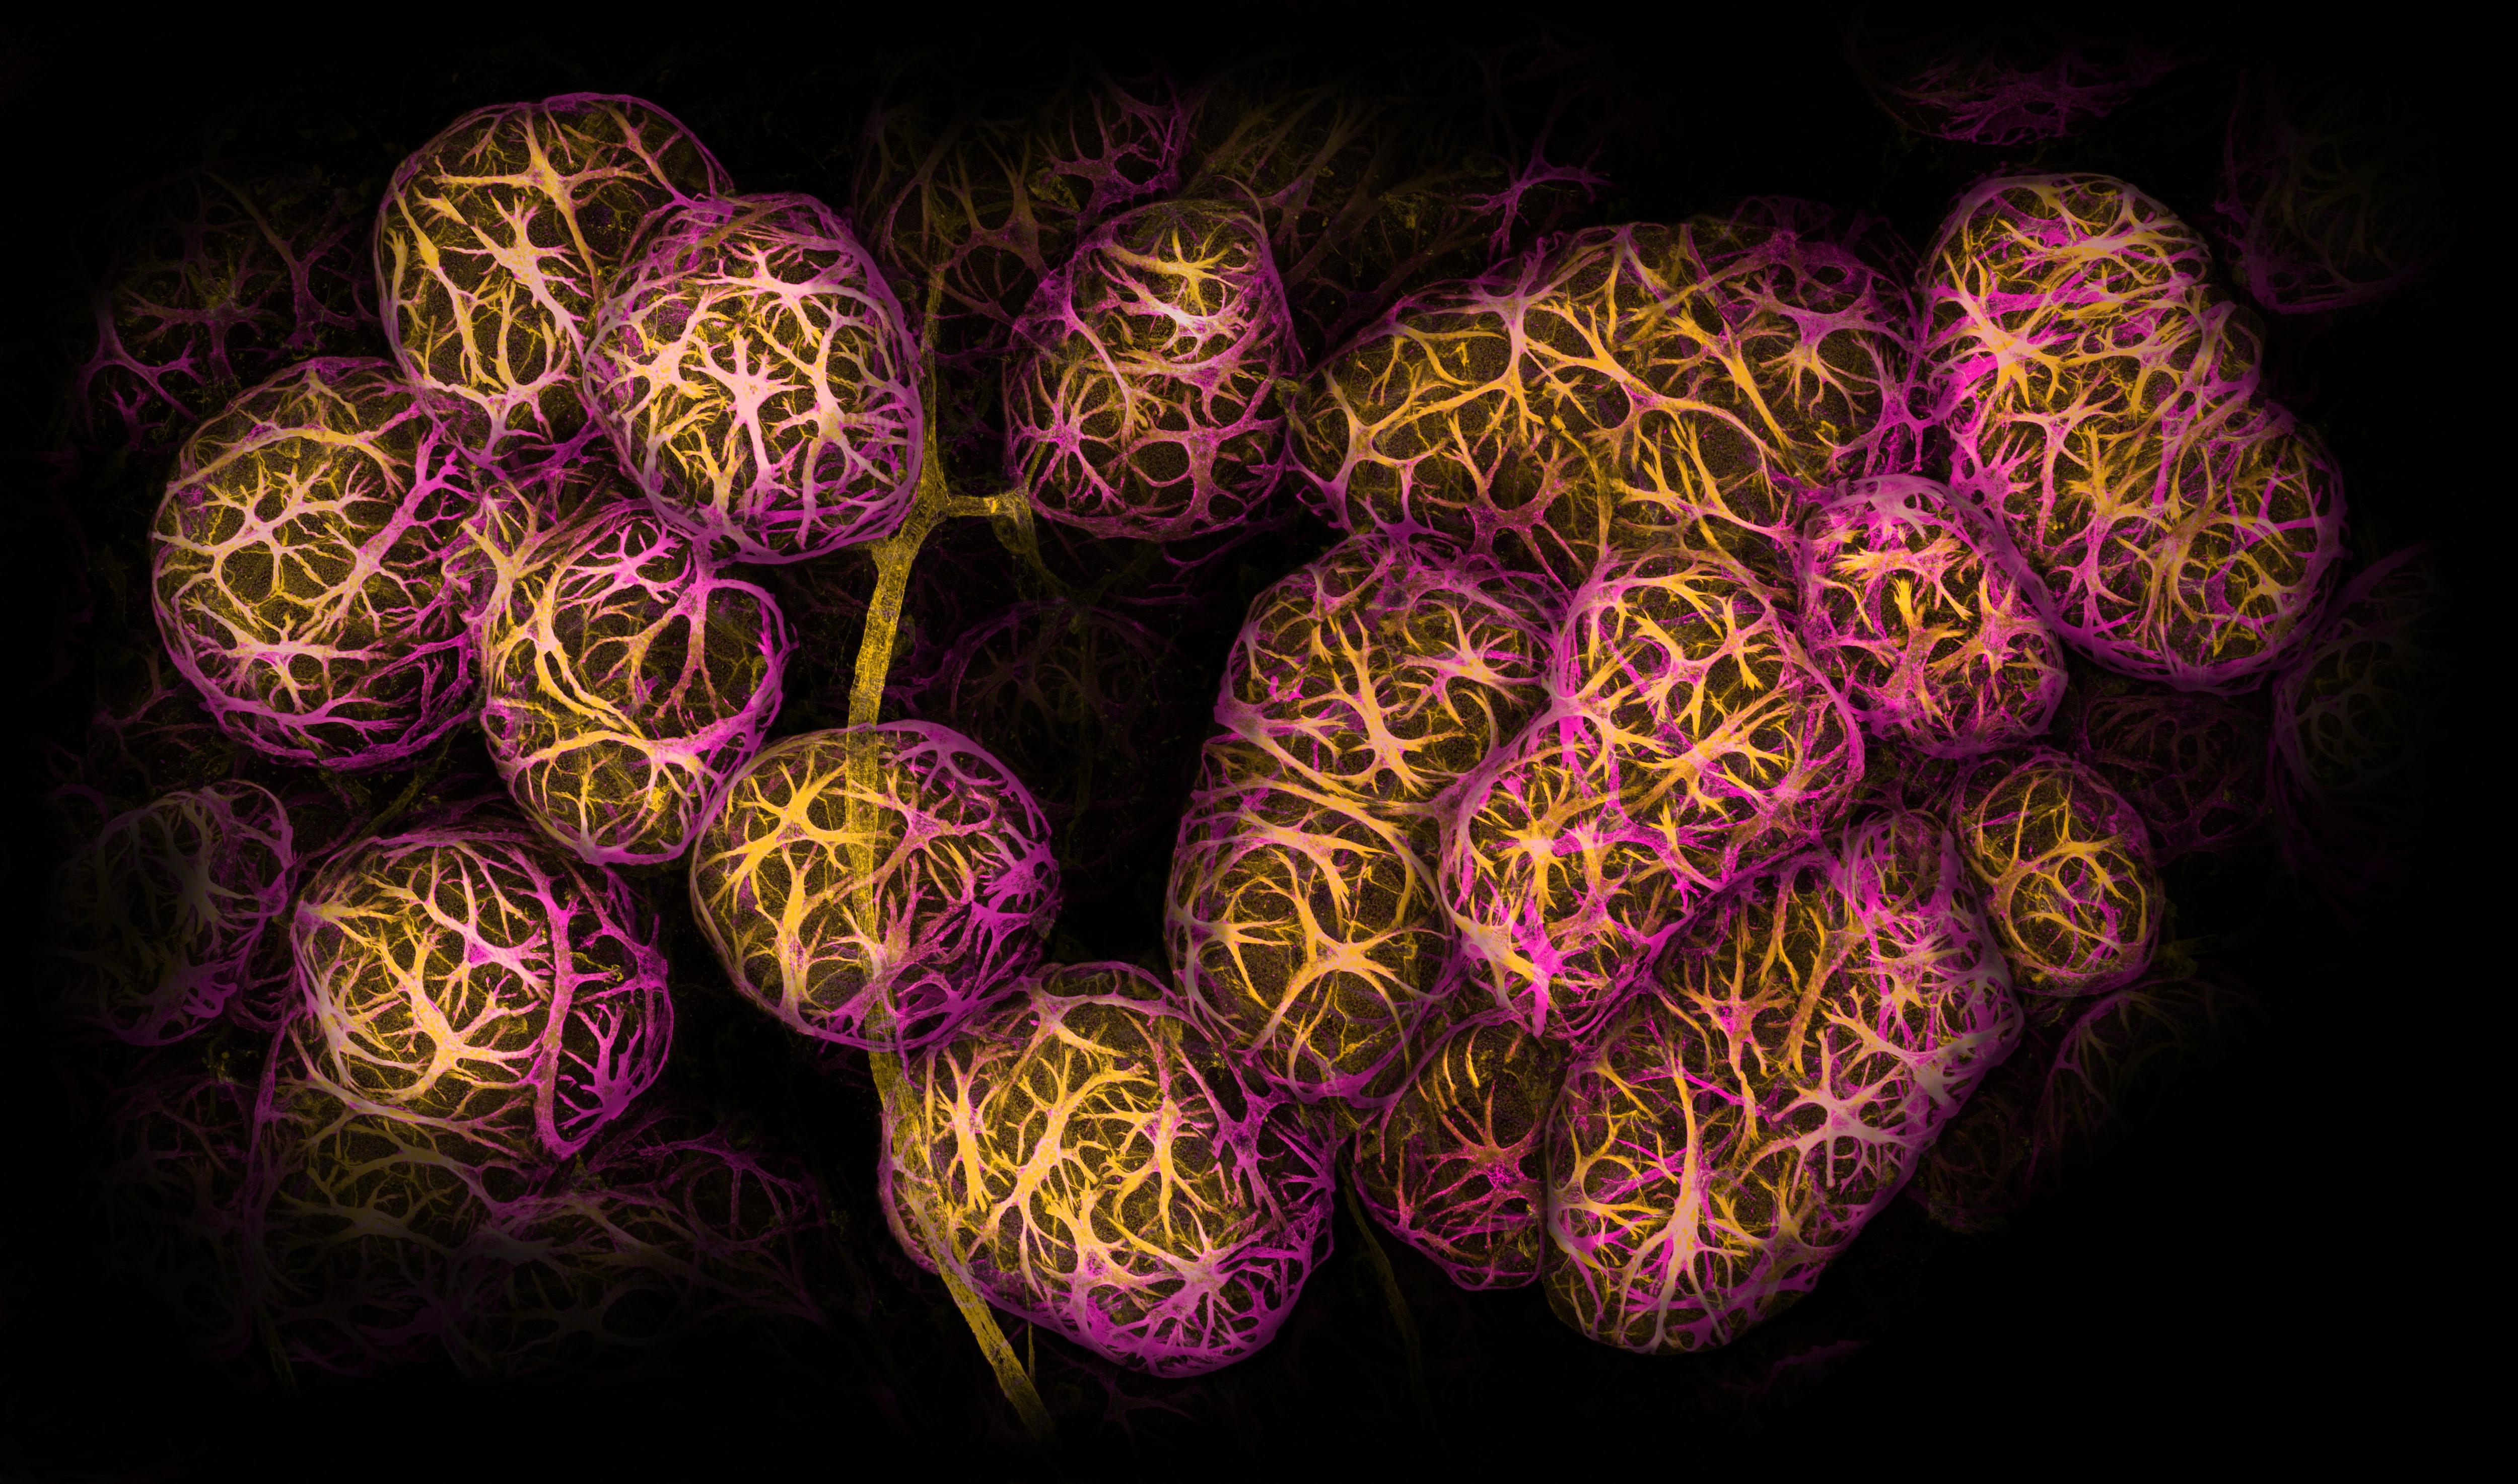 an extremely close-up image of cells inside human breast tissue, they look like spiderweb-covered spheres in pink and yellow